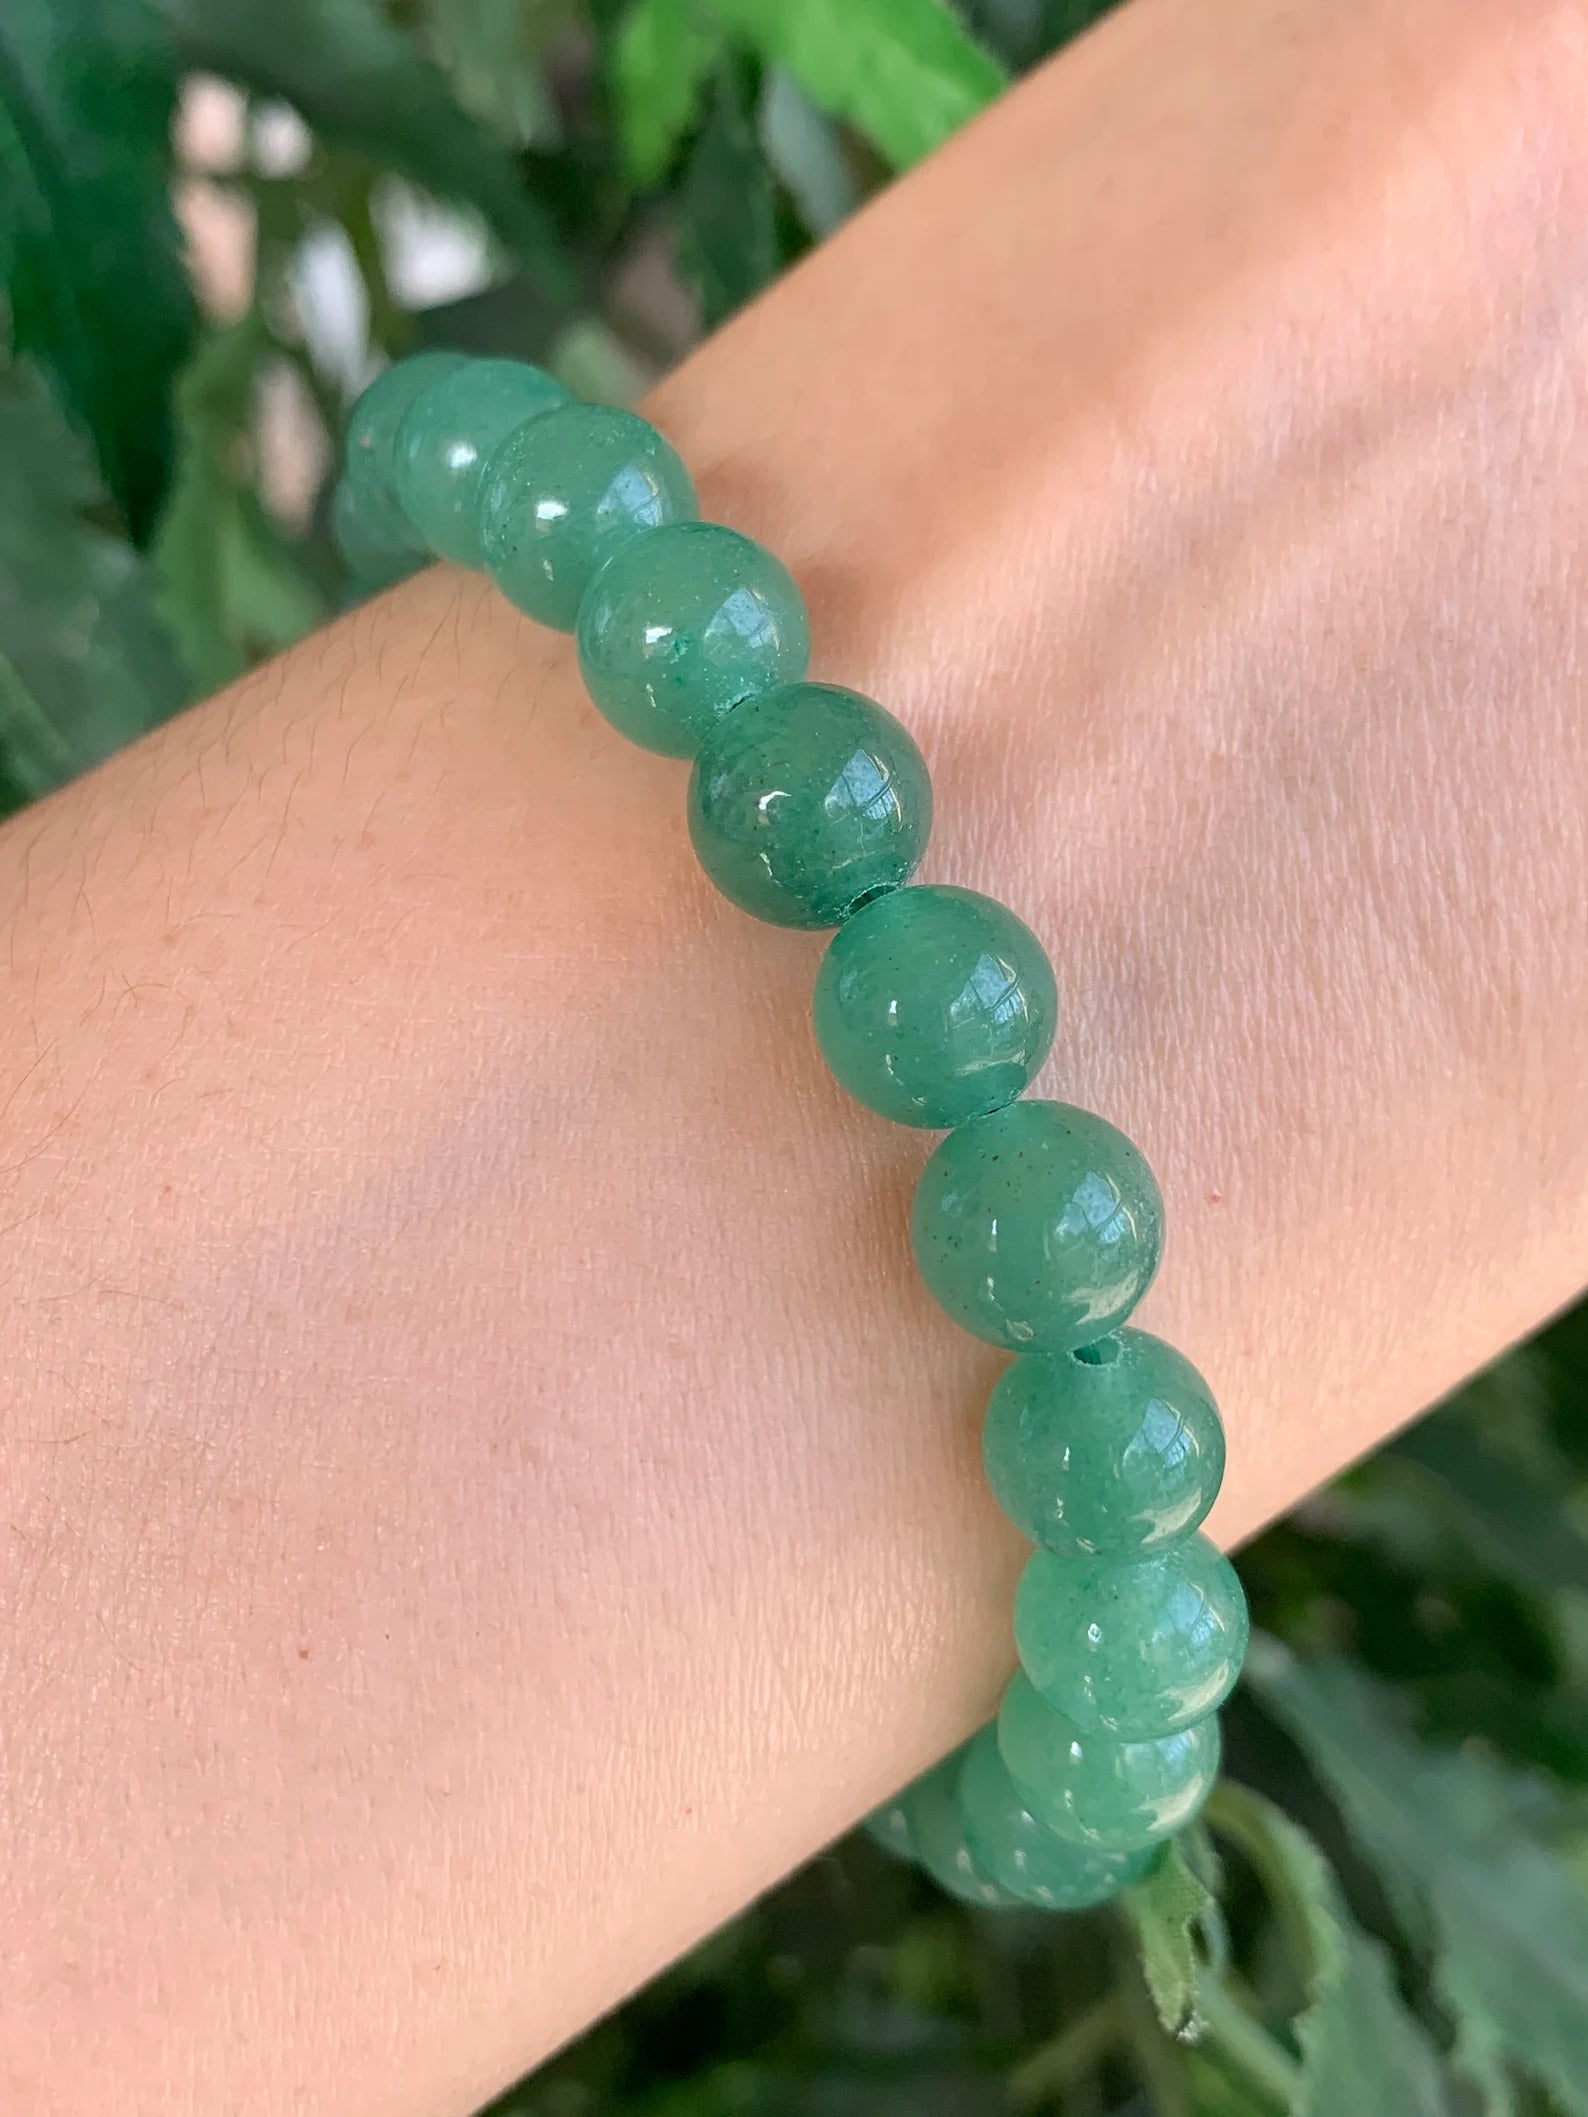 Green Aventurine Ultimate Guide 101 • The Green Crystal